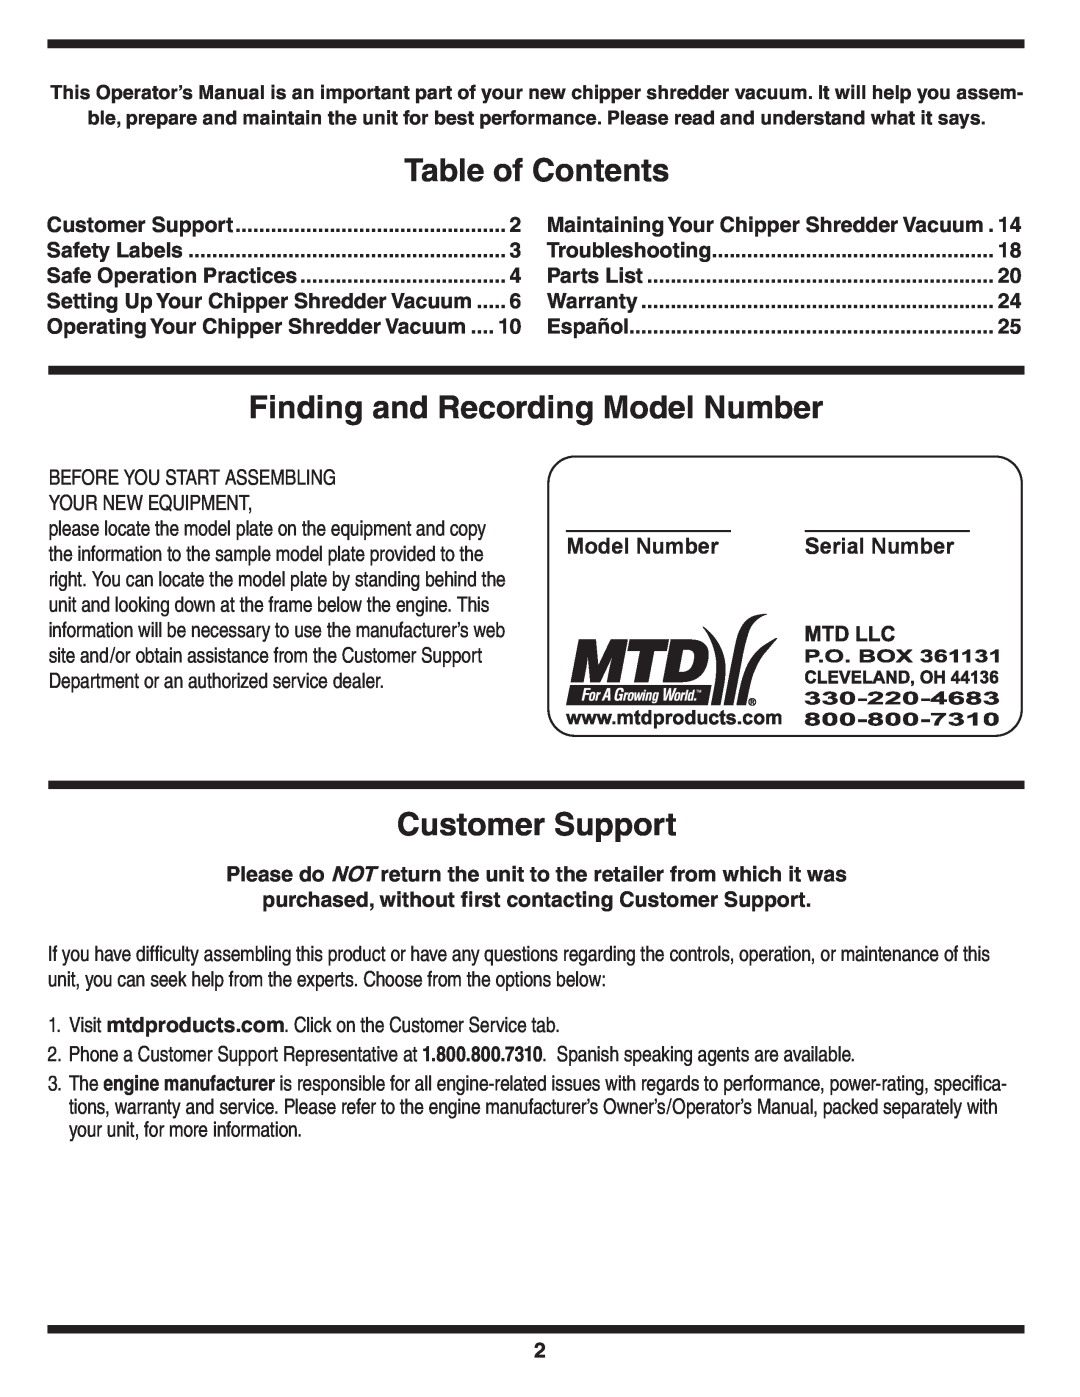 MTD Series 020 warranty Table of Contents, Finding and Recording Model Number, Customer Support, Serial Number 